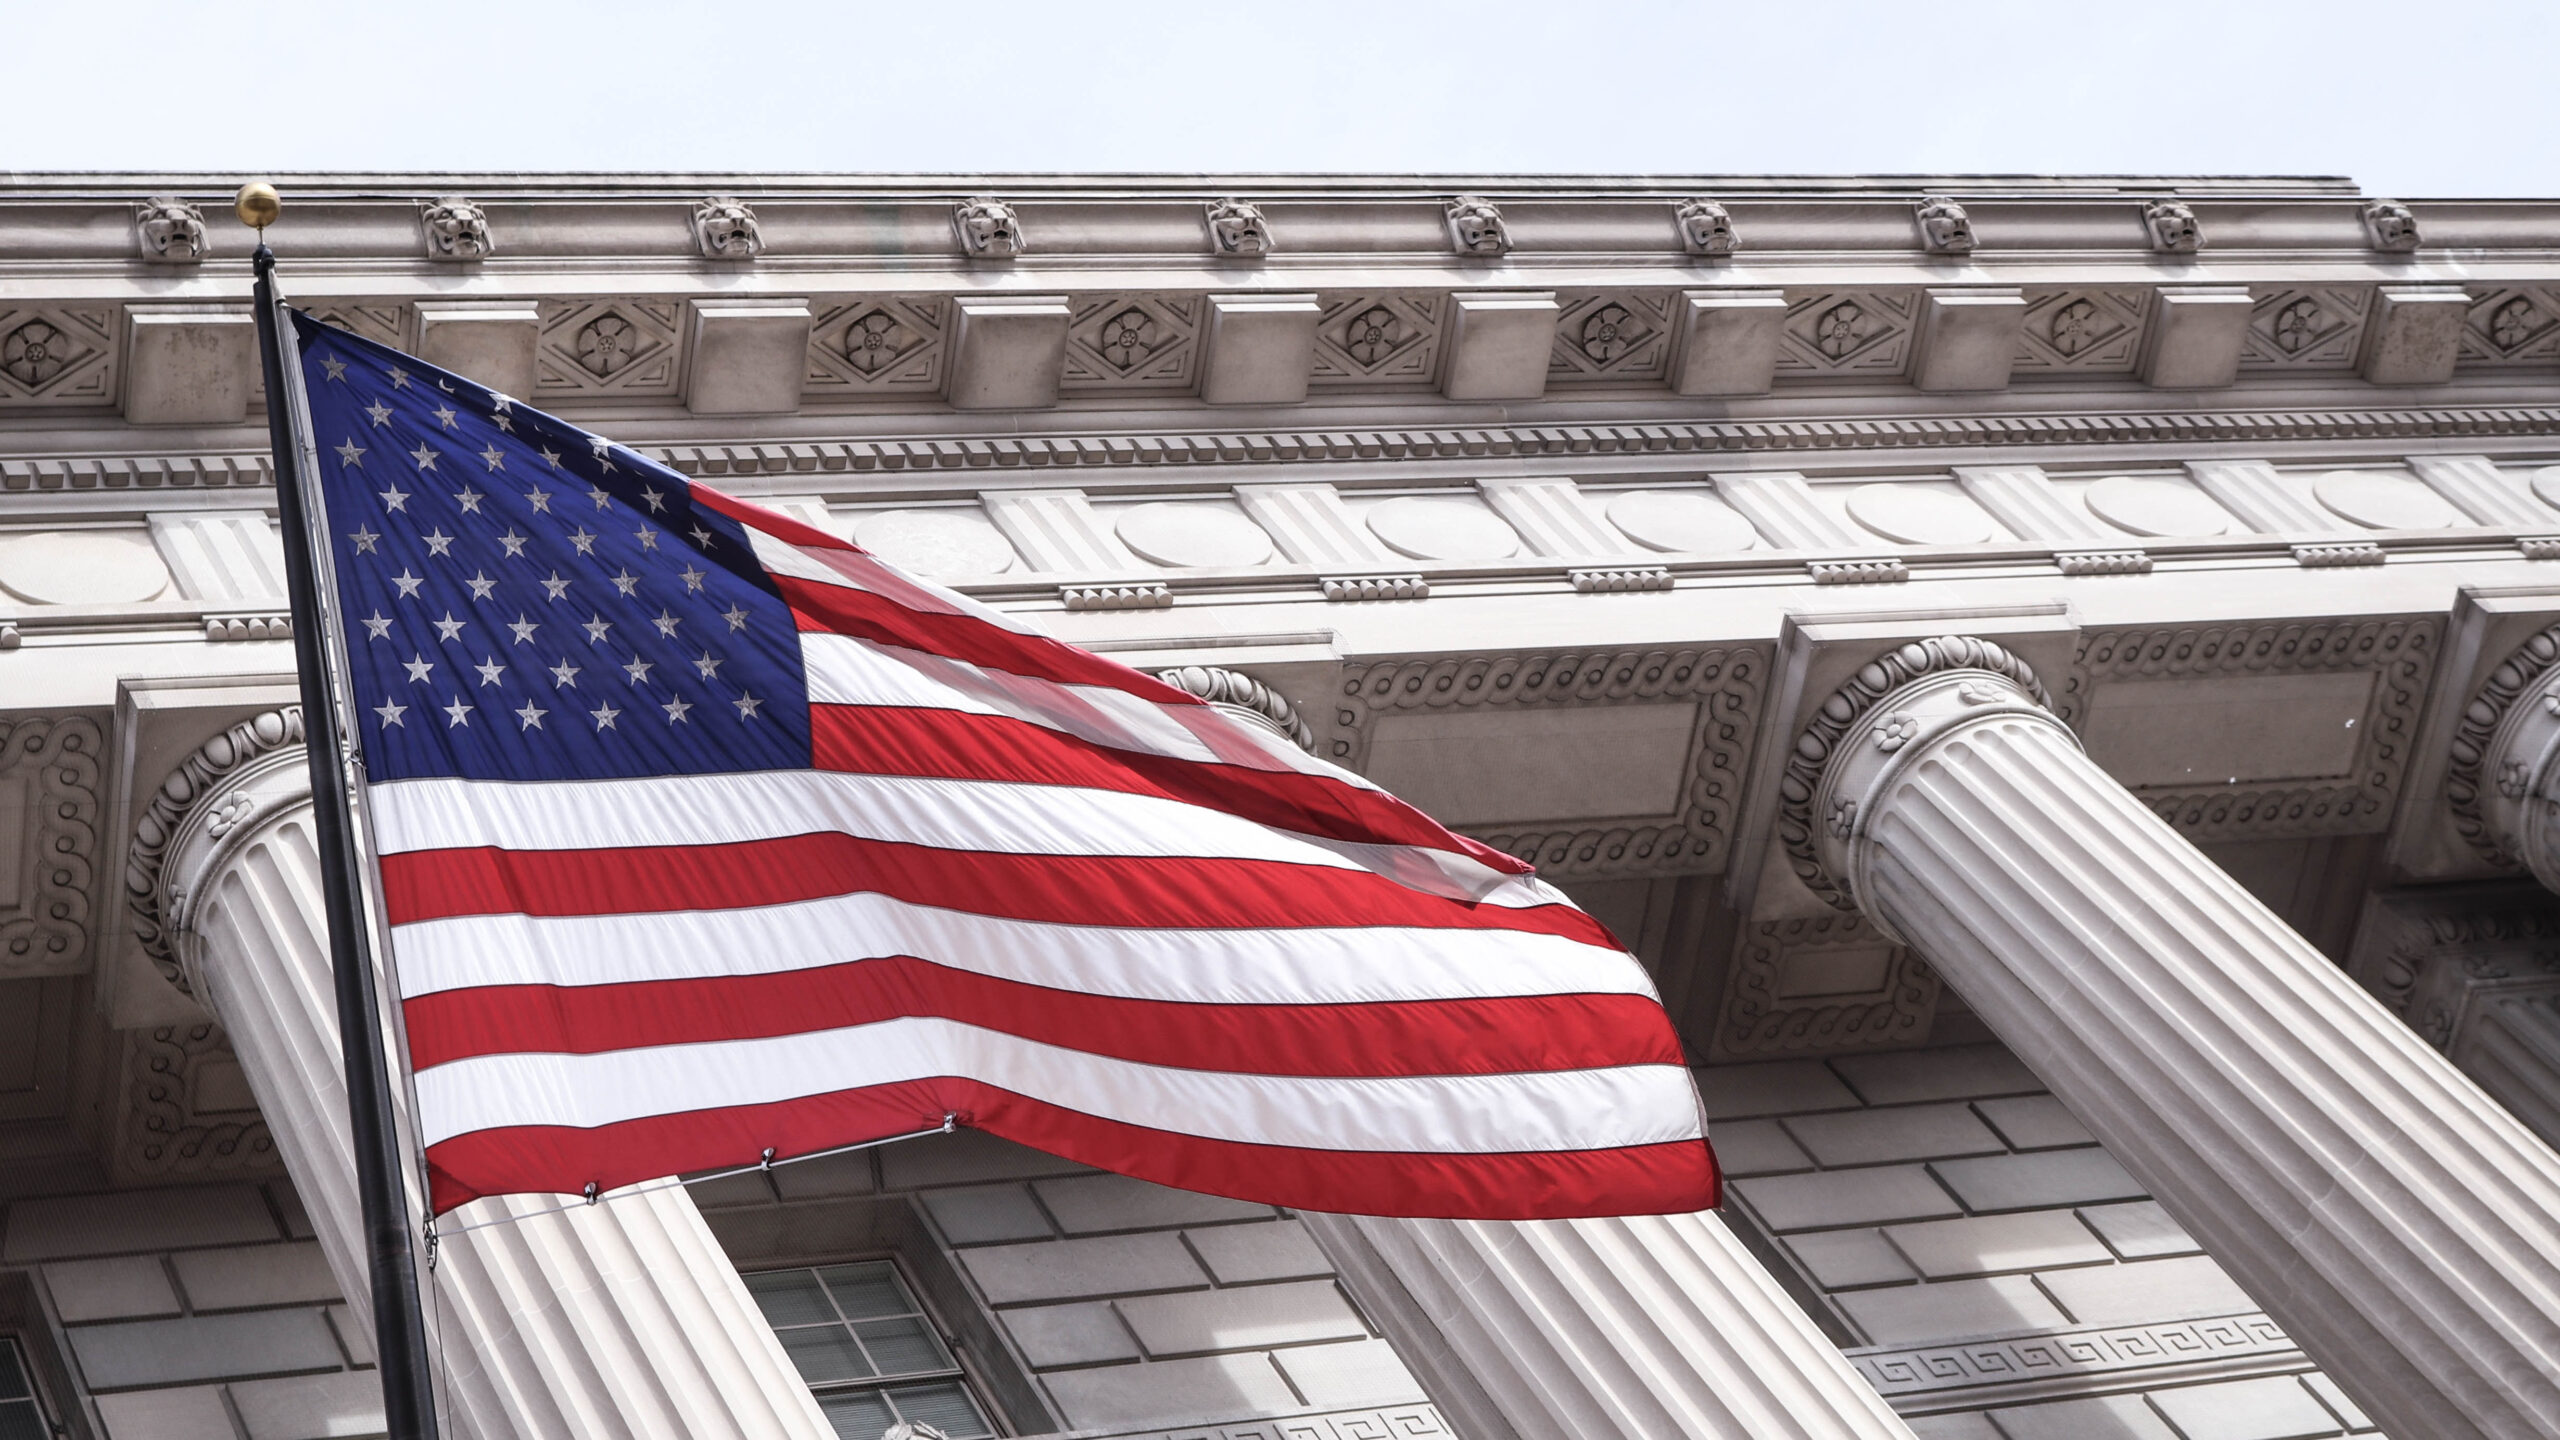 American flag in front of federal building with ornate columns